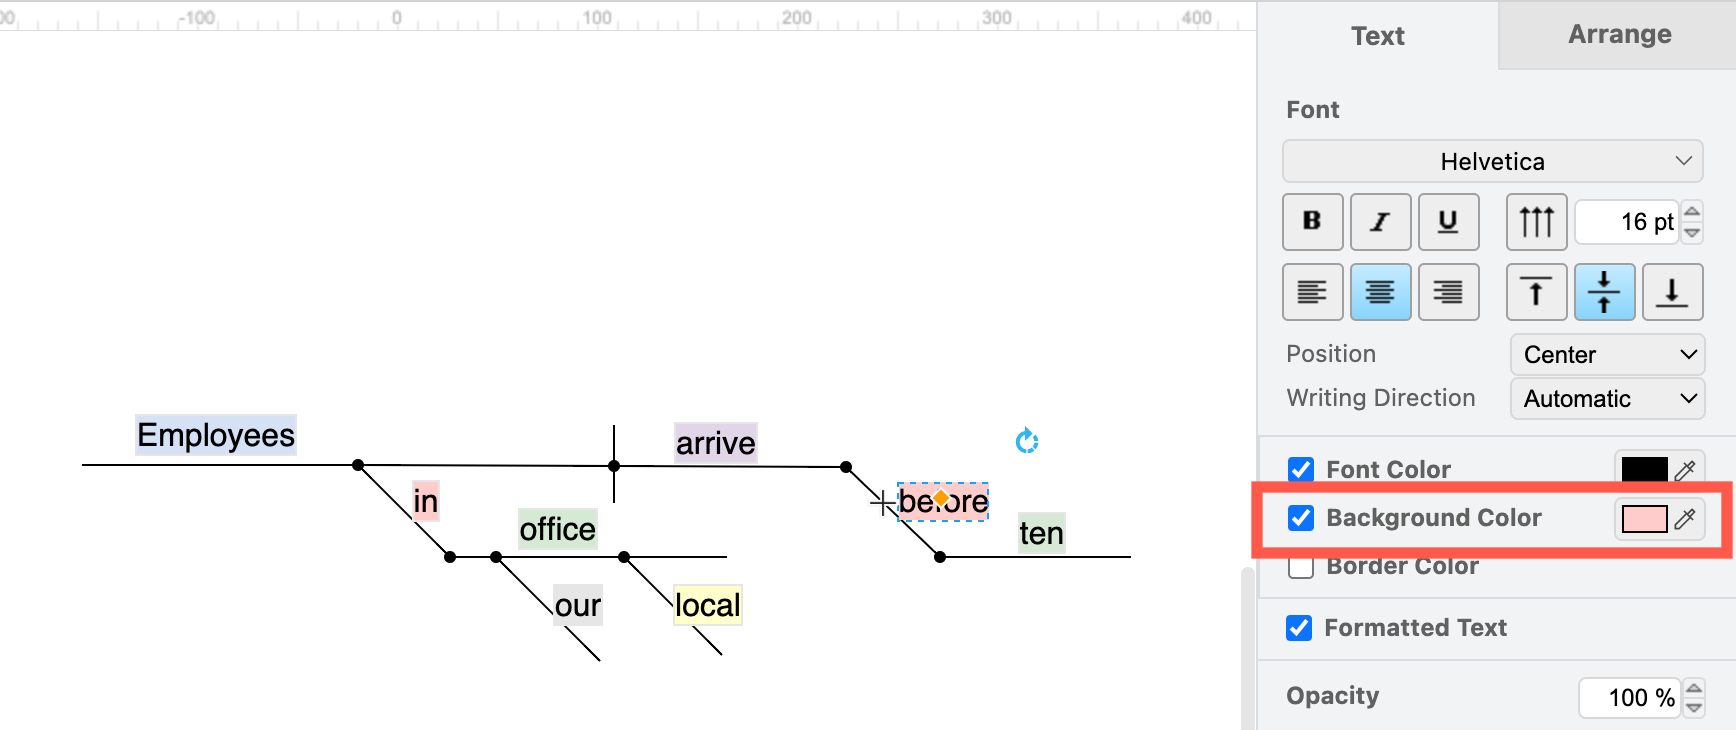 Add a coloured background to the text labels of connectors to indicate the different parts of the sentence